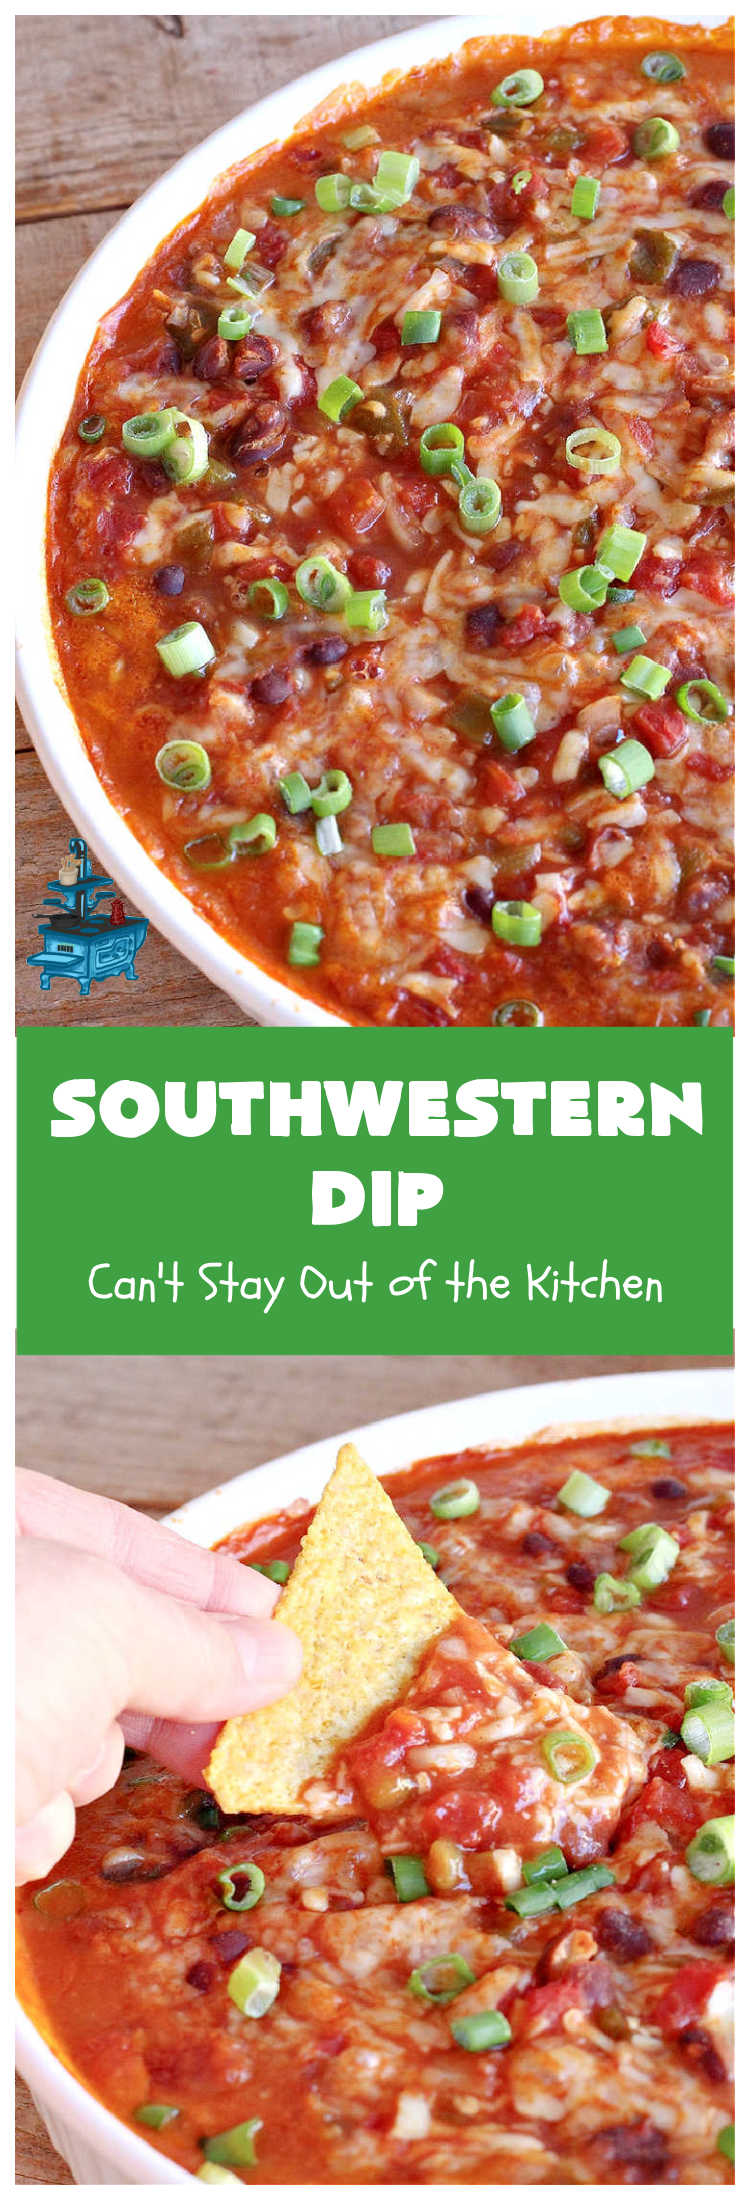 Southwestern Dip | Can't Stay Out of the Kitchen